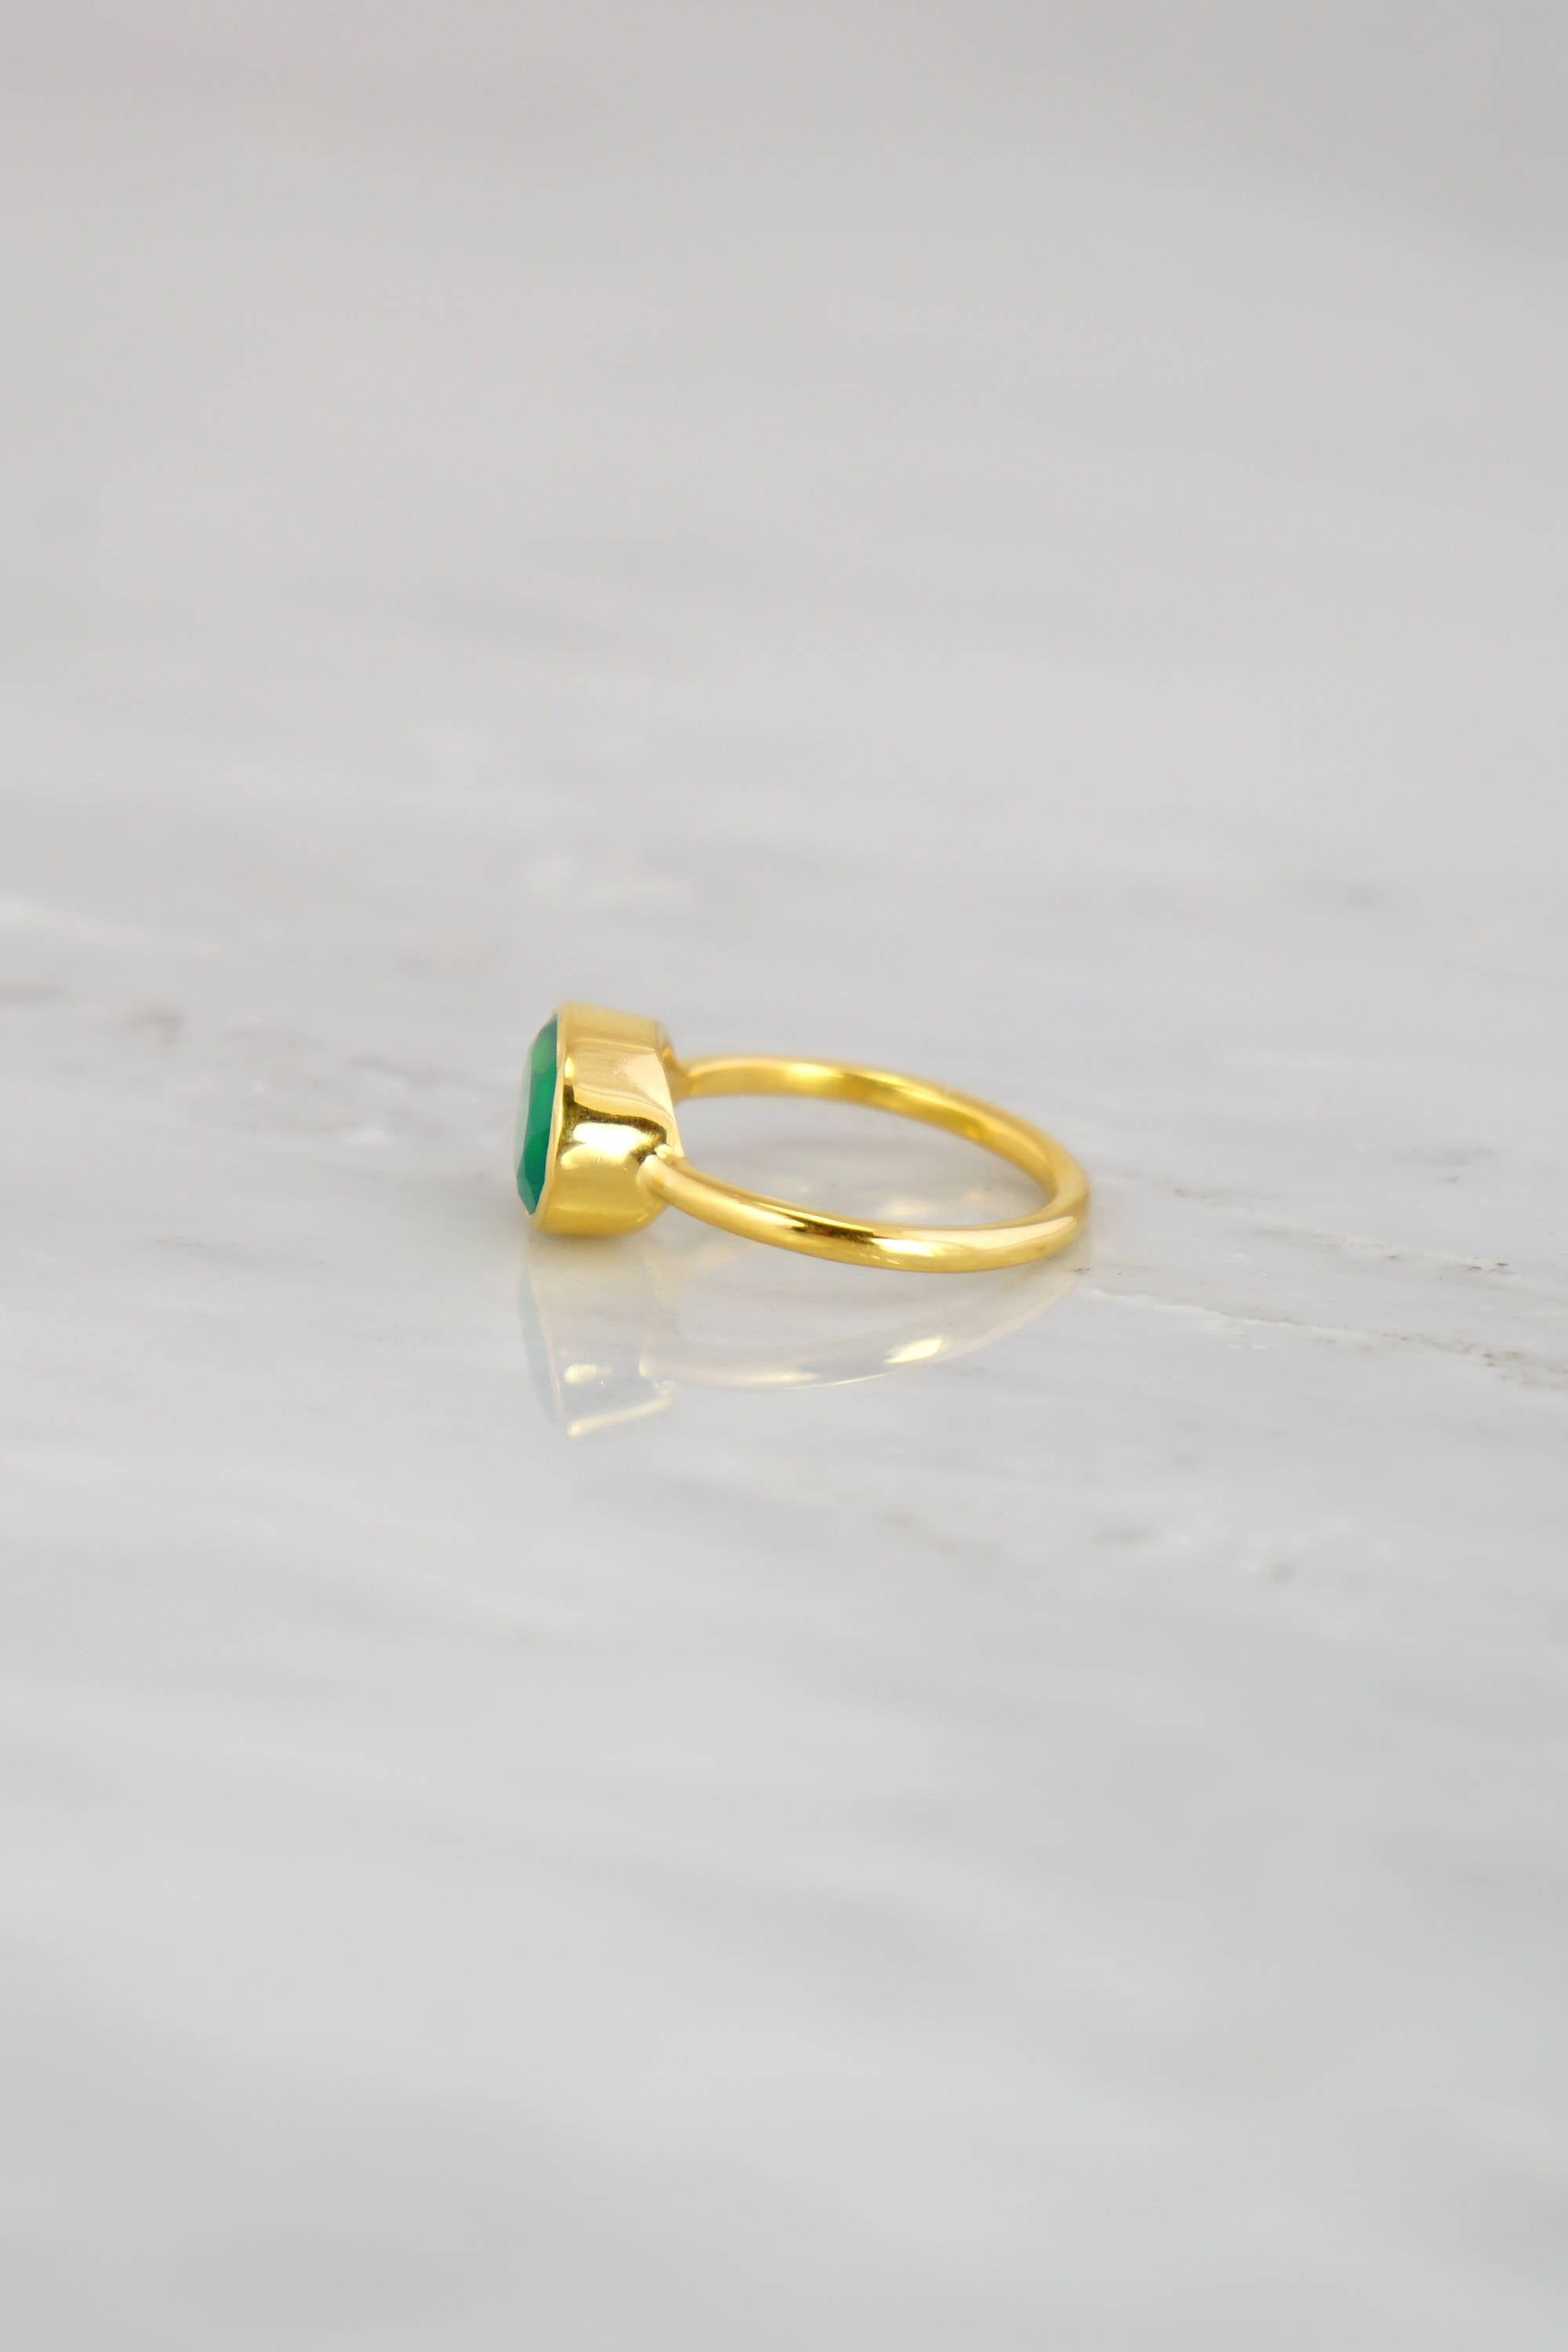 Fashion Gold Ring With Natural Dark Green Emerald Stone. Stock Photo,  Picture and Royalty Free Image. Image 187306808.